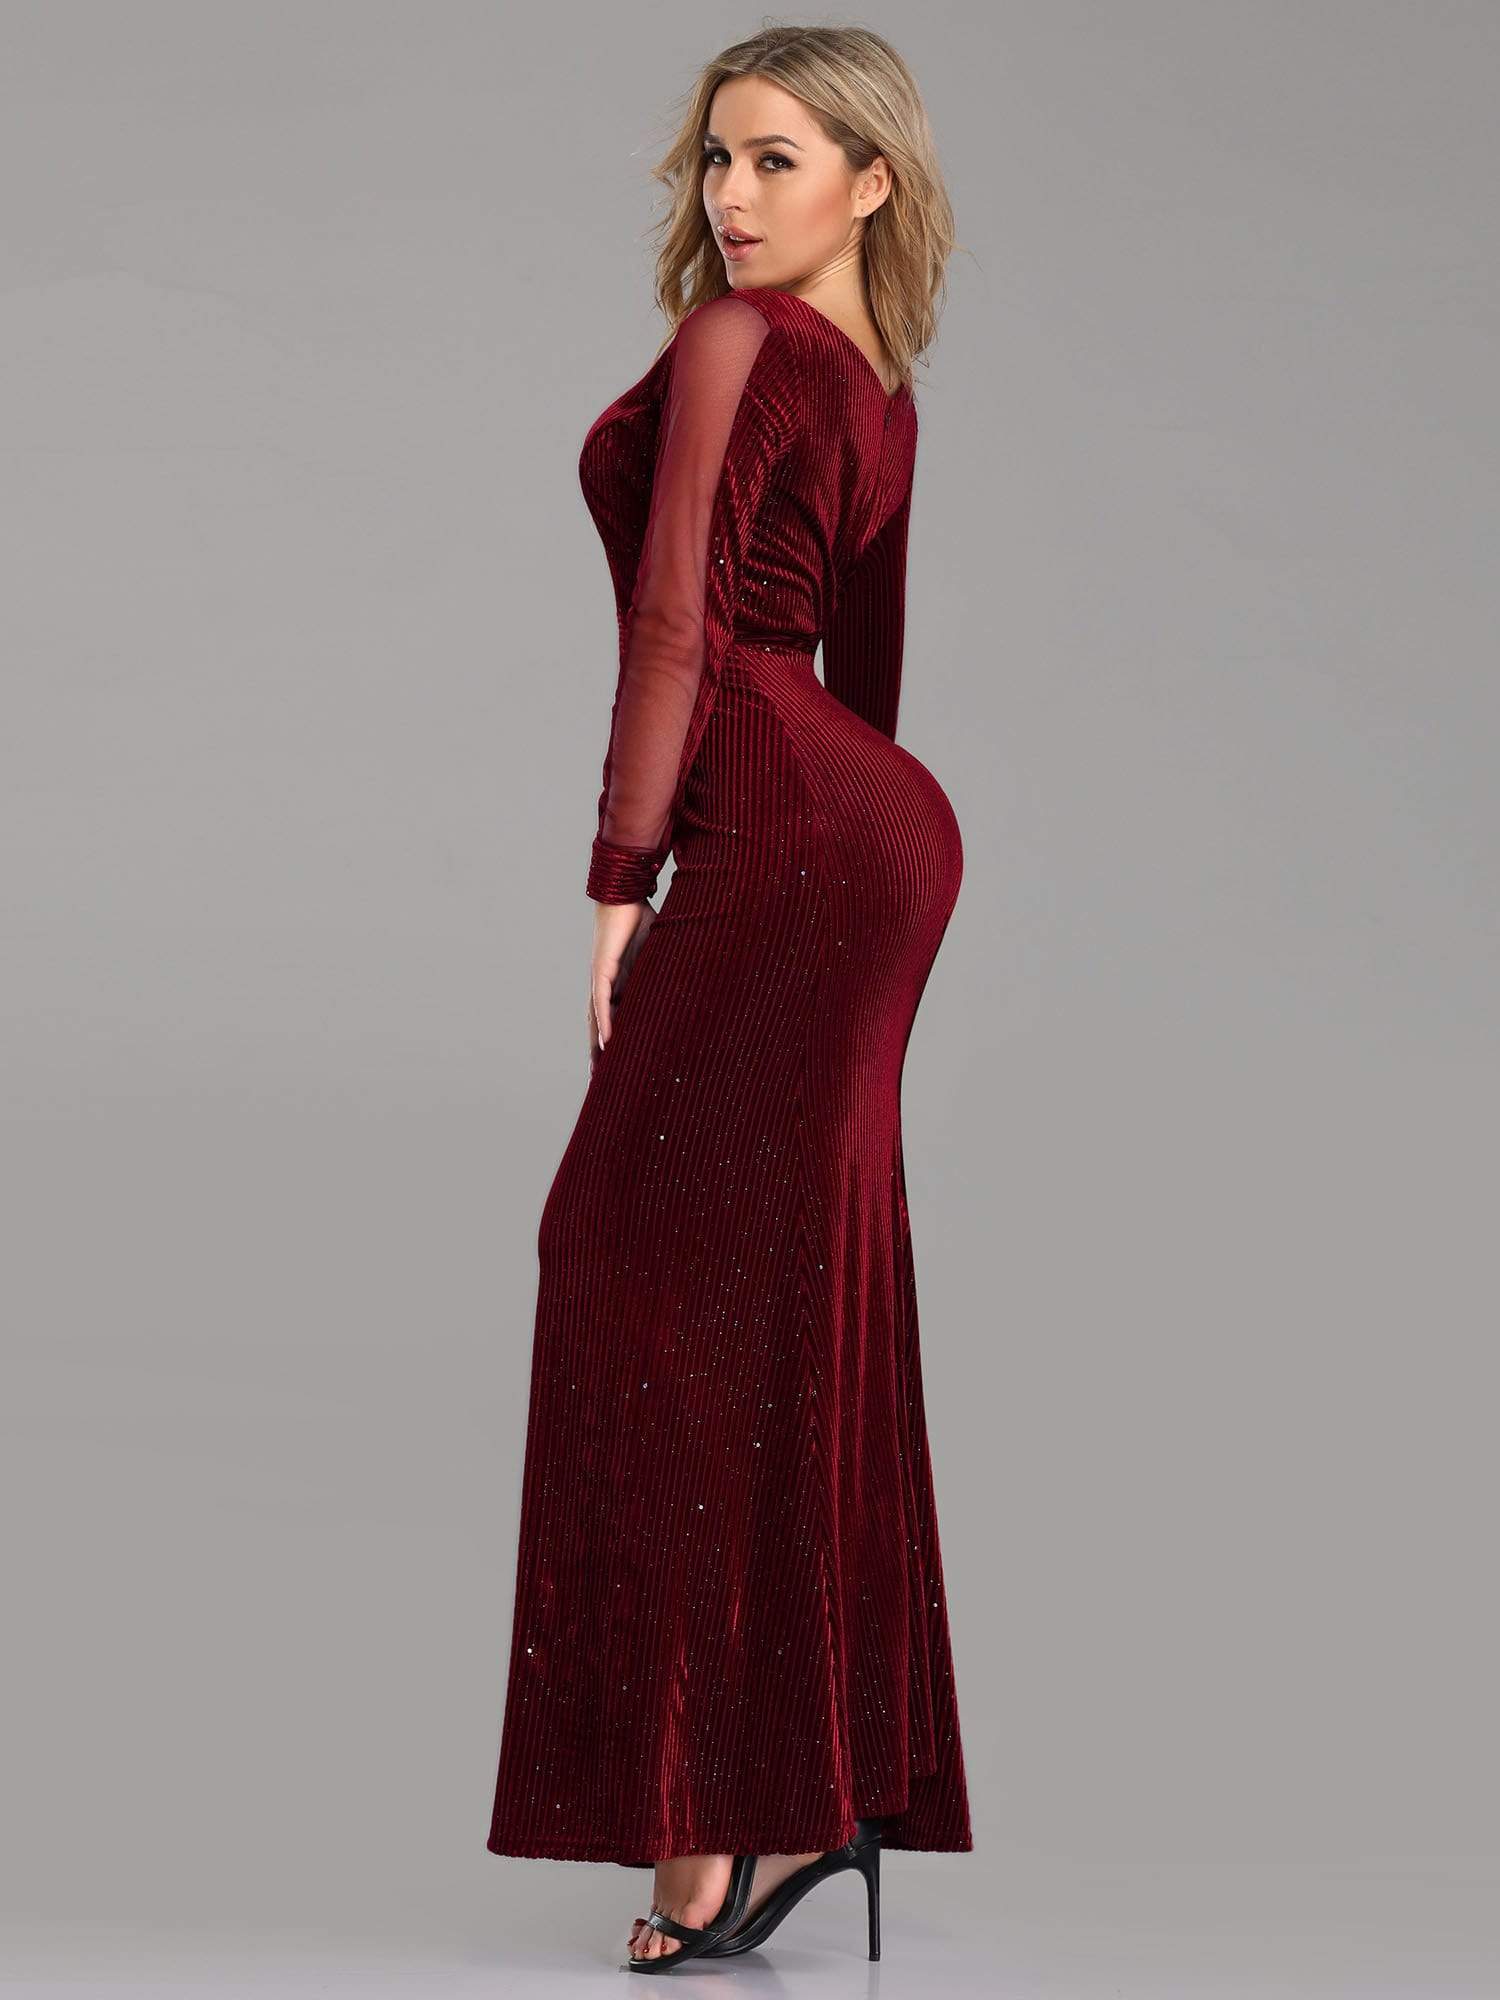 COLOR=Burgundy | Shimmery Evening Dress With Long Sleeves-Burgundy 2